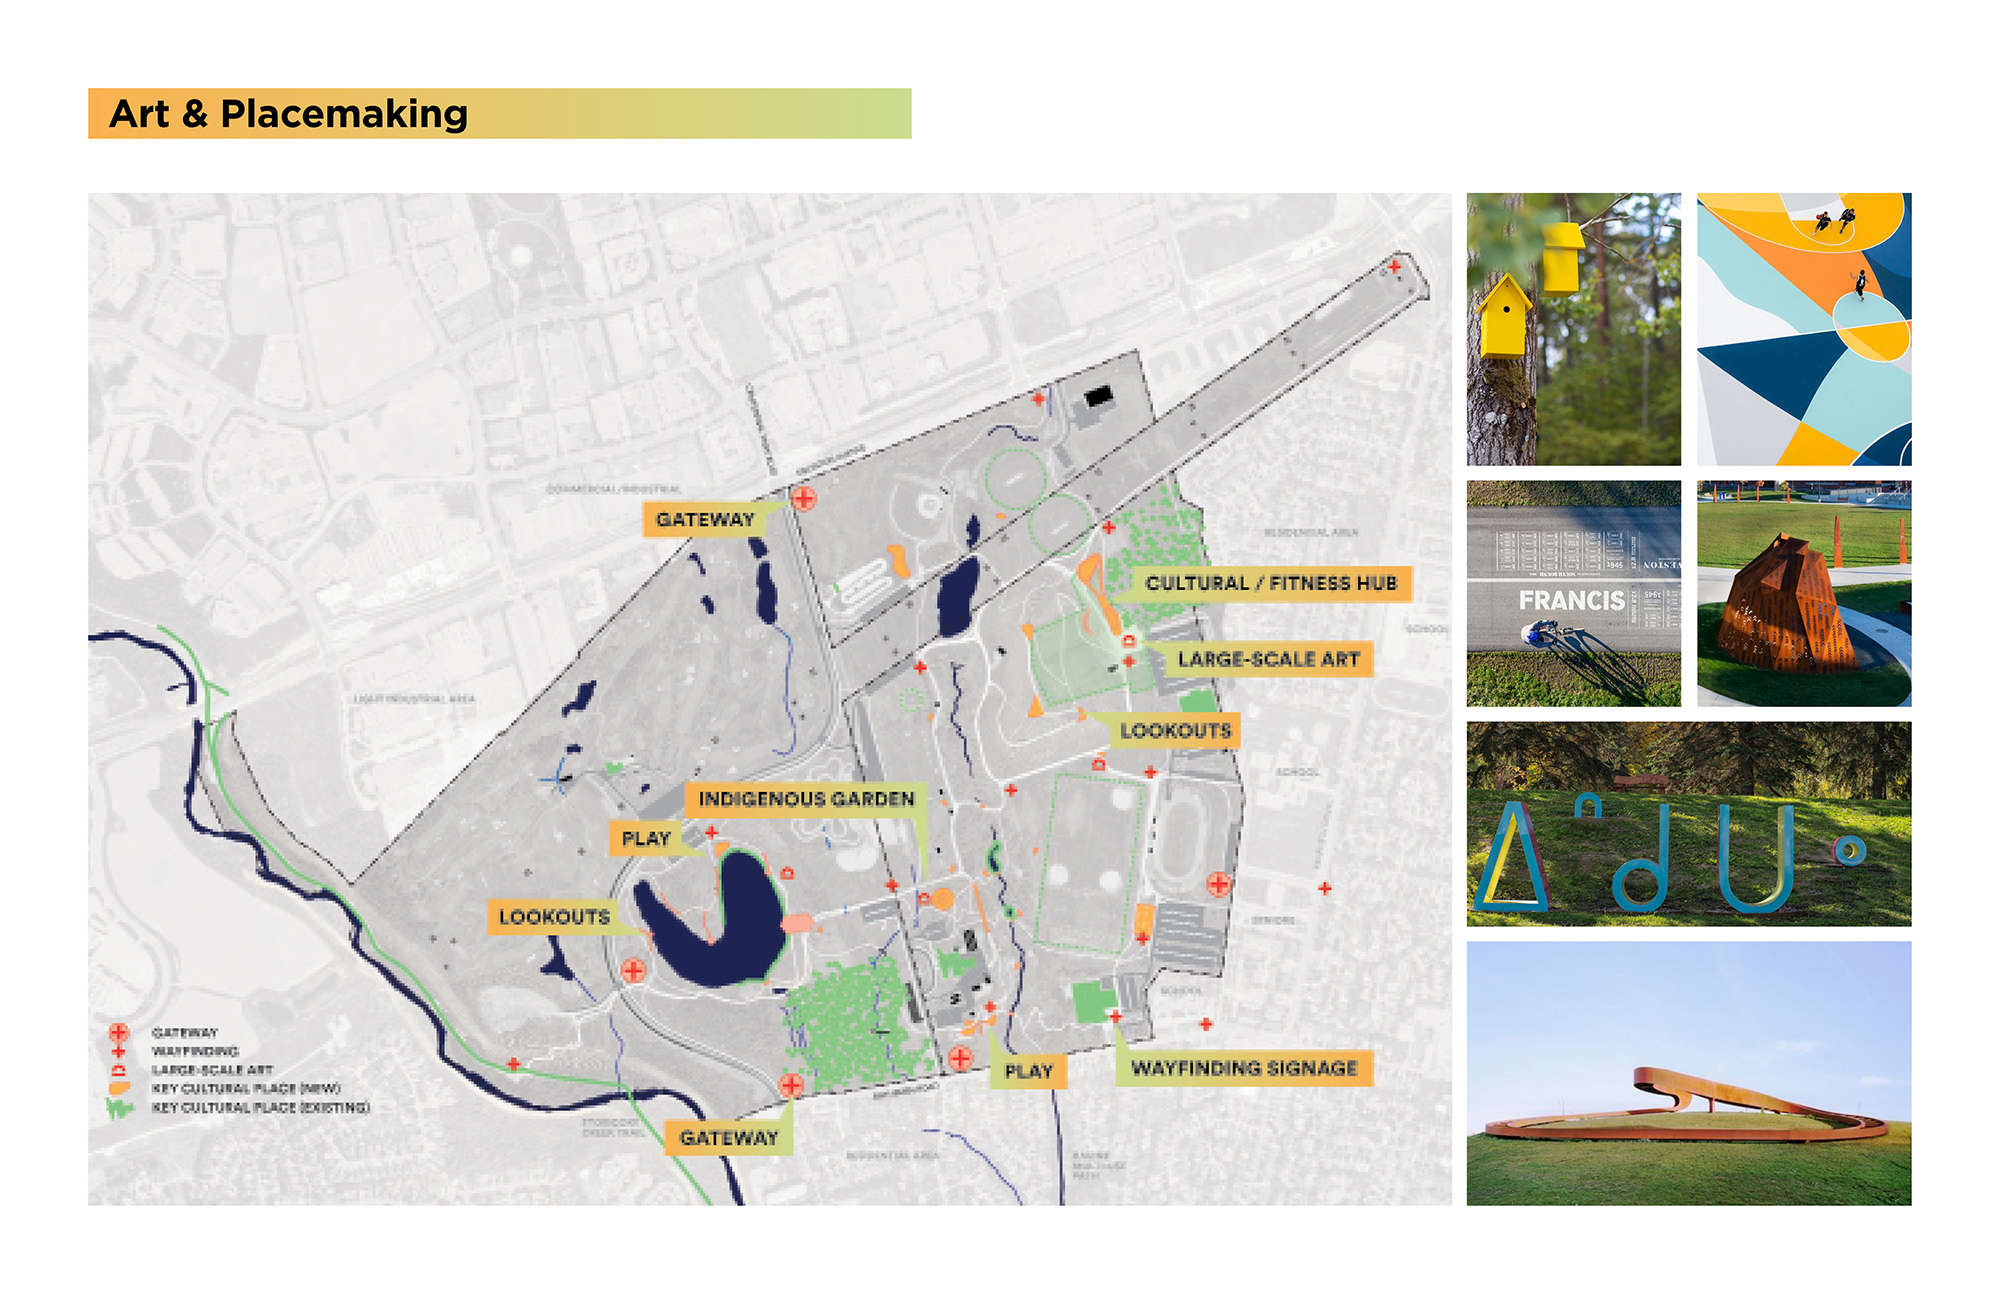 This plan image depicts the proposed placemaking features. This includes wayfinding signage located at key intersections throughout the site; gateways at key entrances; large-scale art located by the pond, conservatory and hill; key new cultural places (including playgrounds, plazas, gardens and lookouts